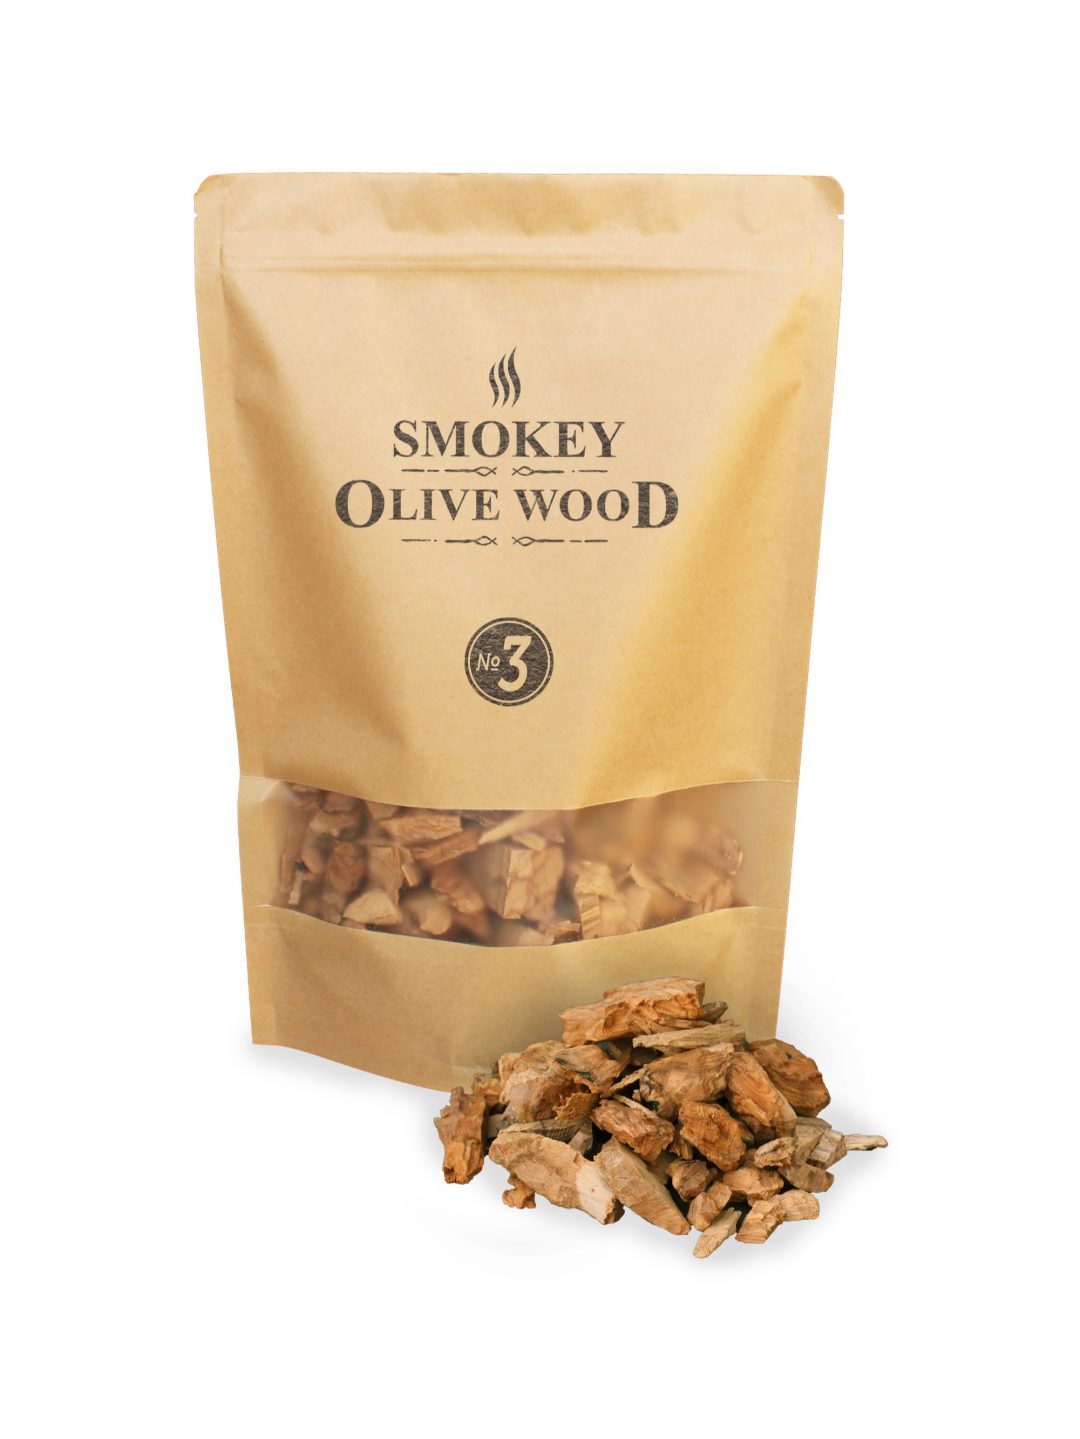 SOW olive wood chips